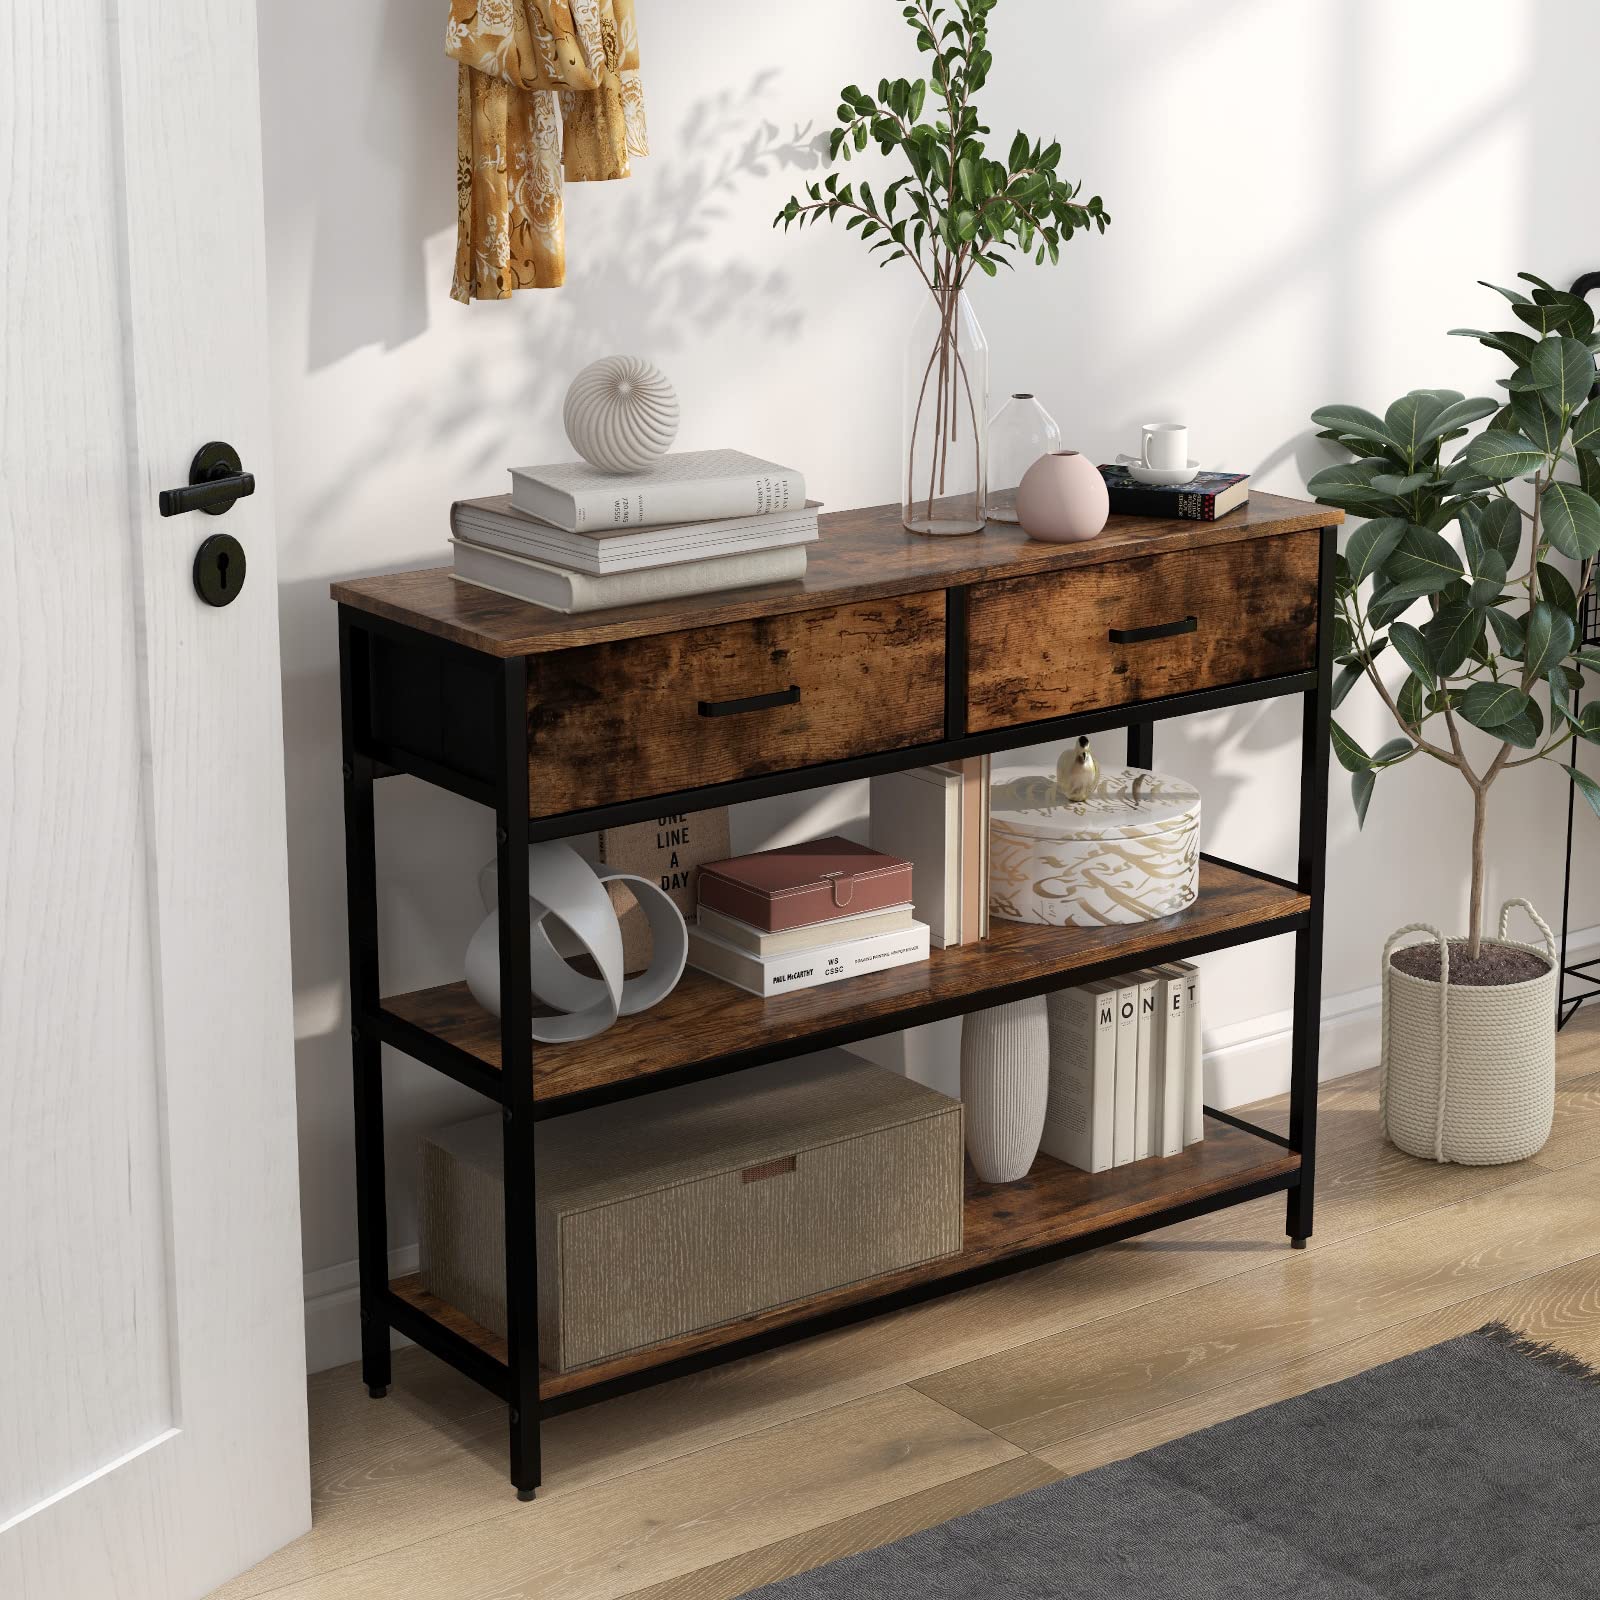 Giantex 3-Tier Entryway Table with Storage - Sofa Side Table